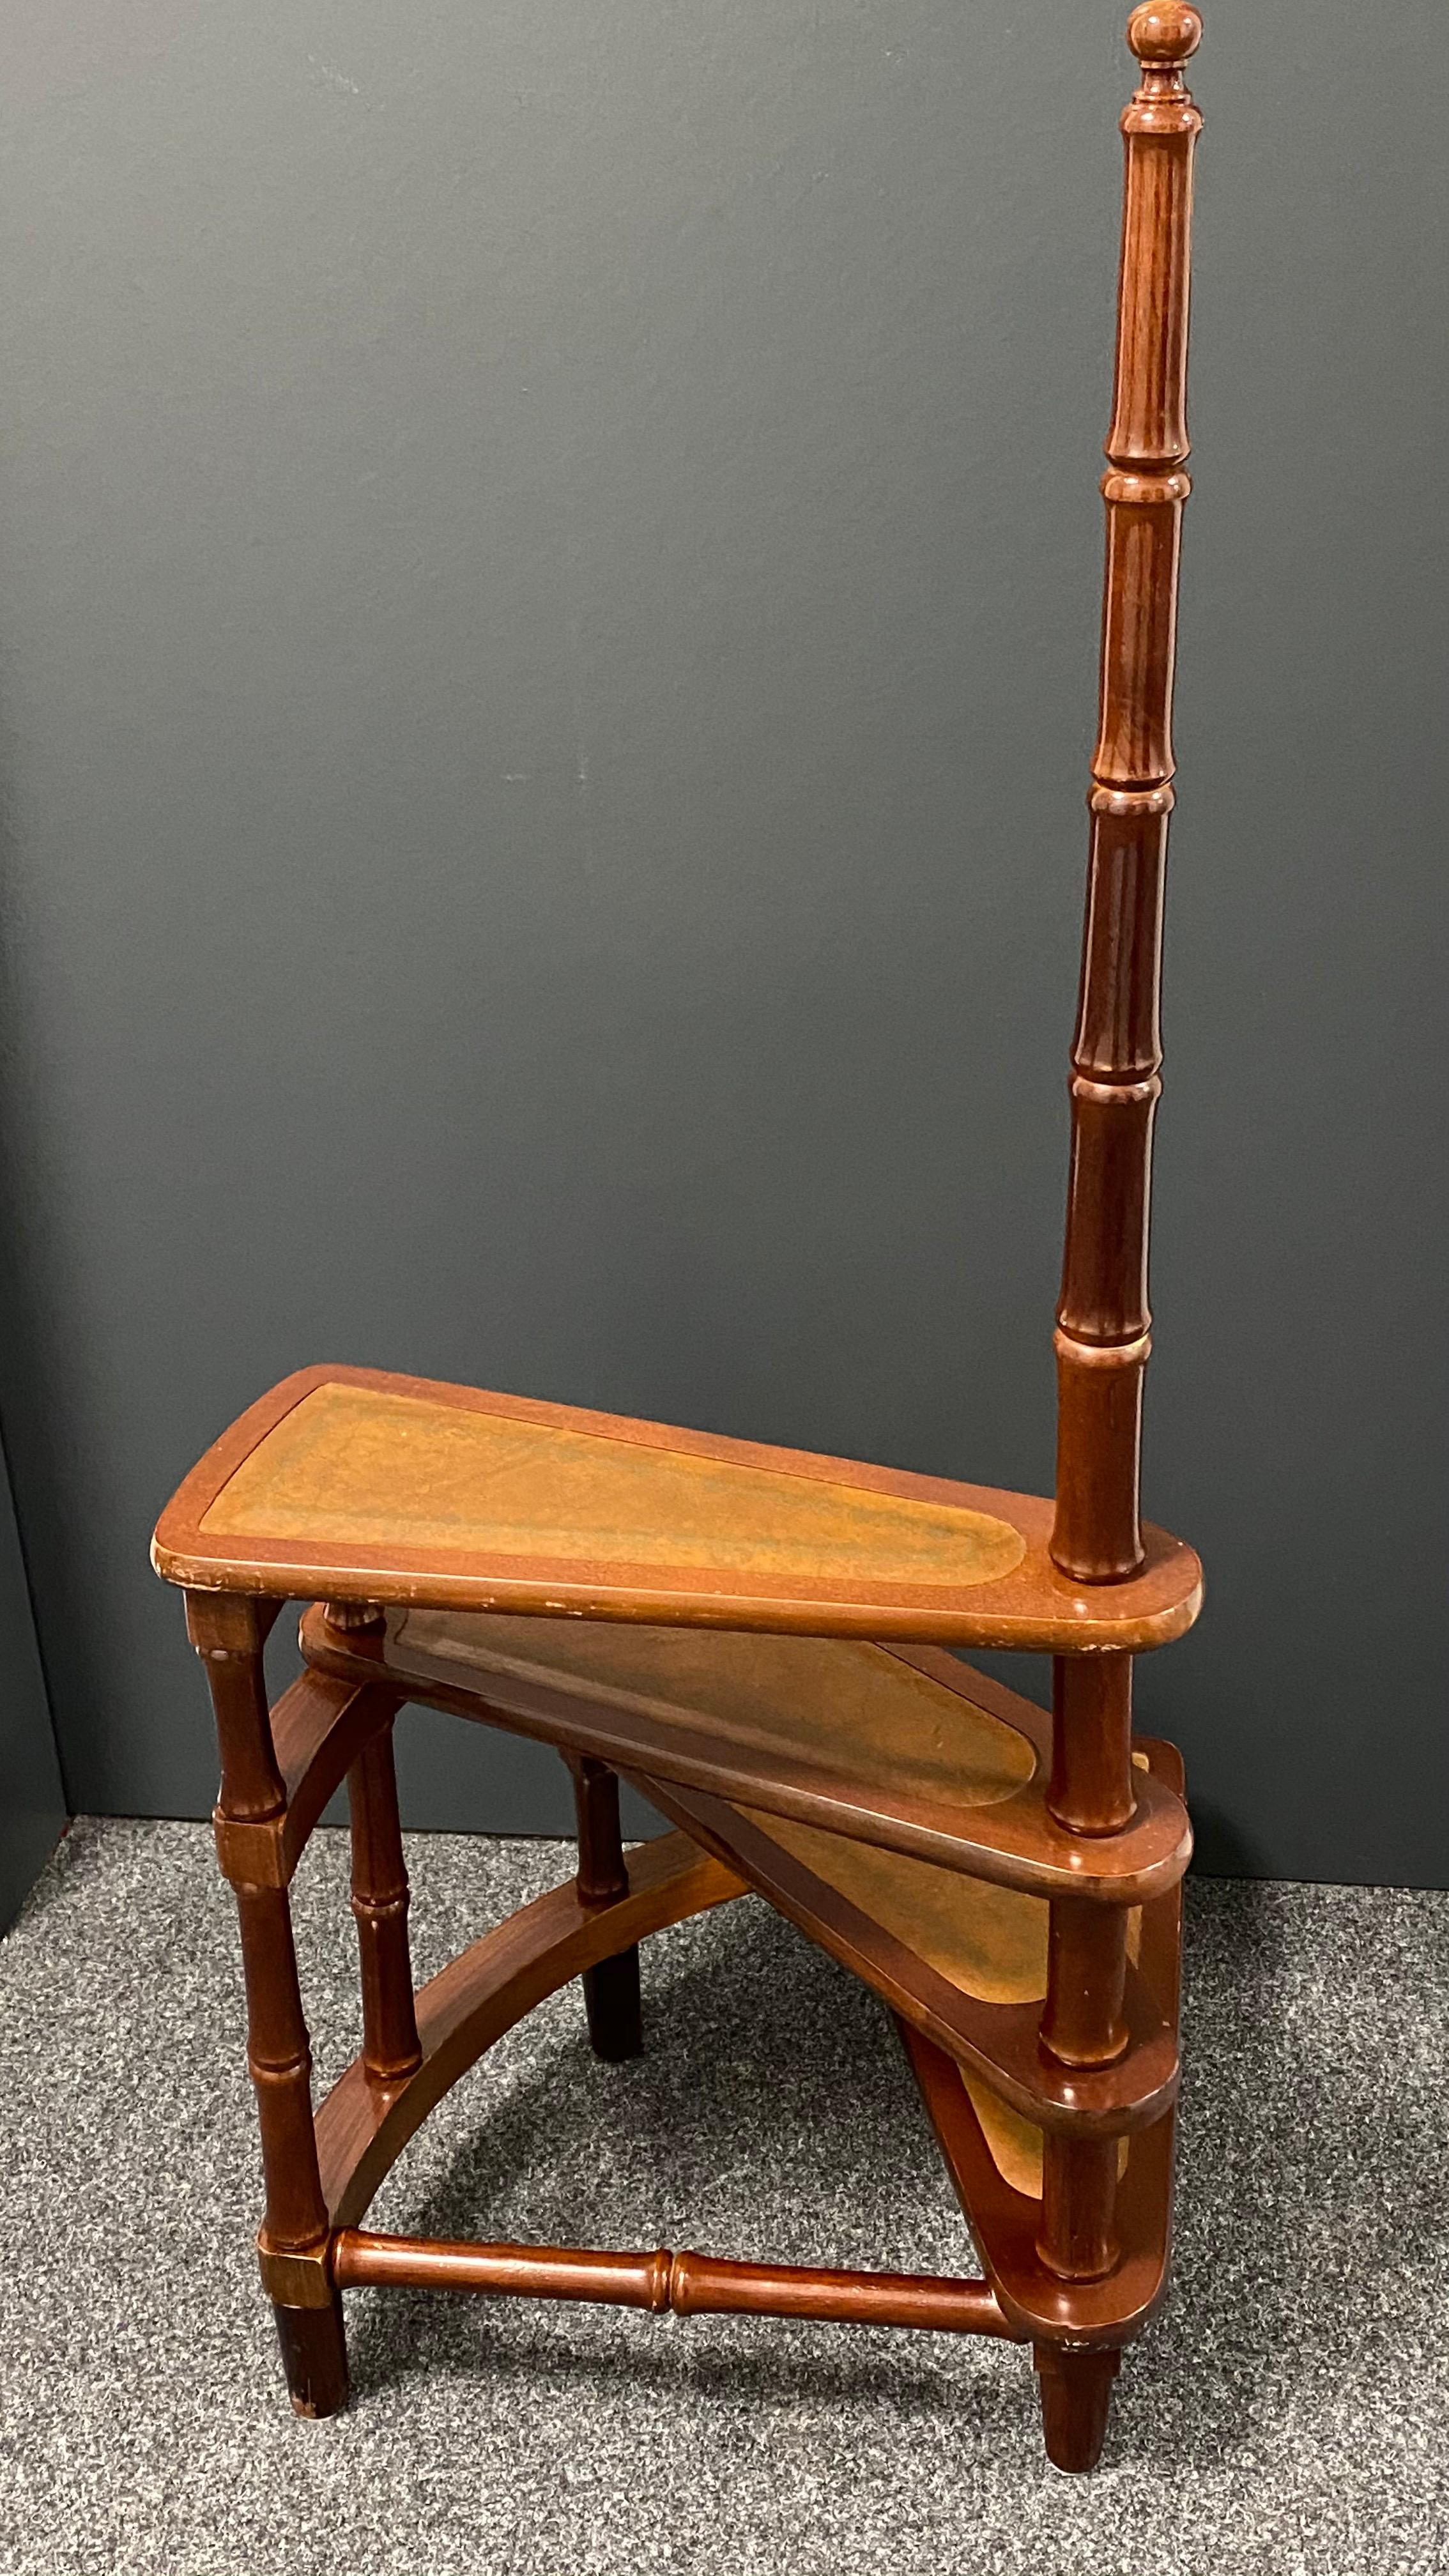 Hand-Carved Mid-20th Century German Carved Wood and Leather Spiral Step Library Ladder